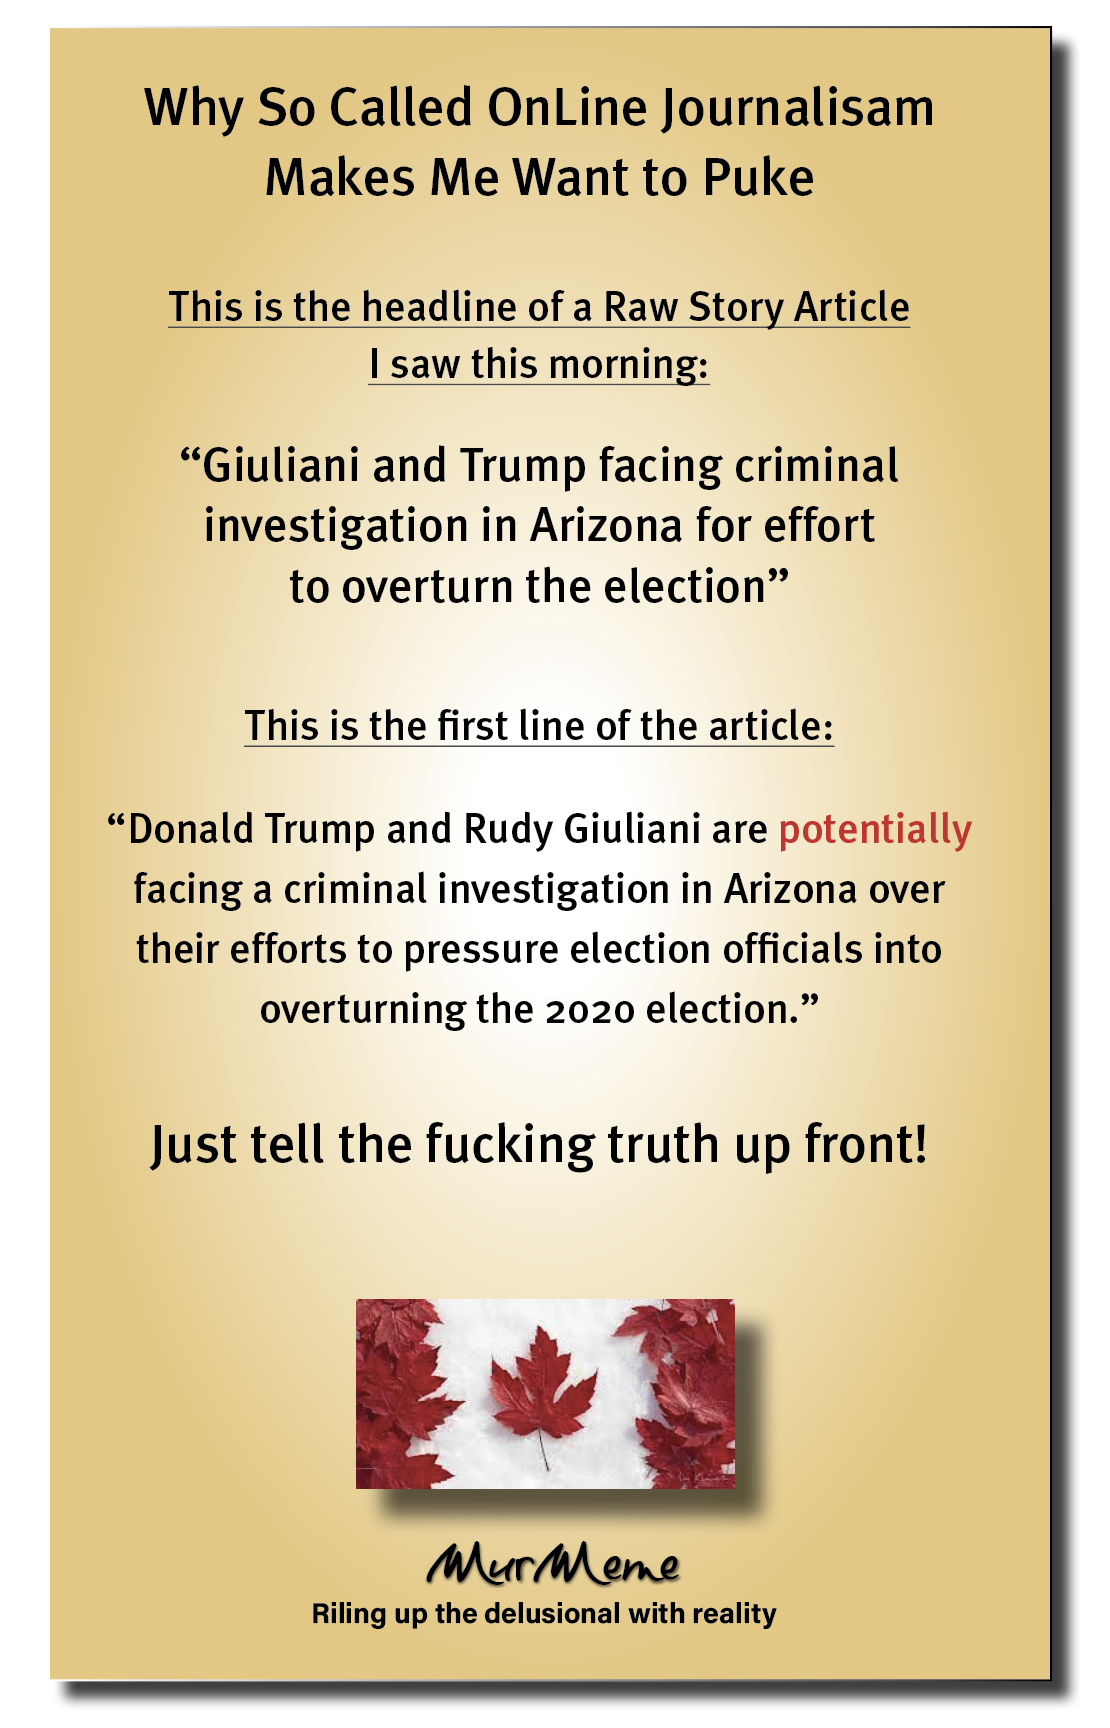 Why So Called OnLine Journalisam
Makes Me Want to Puke

This is the headline of a Raw Story Article
I saw this morning:

“Giuliani and Trump facing criminal
investigation in Arizona for effort
to overturn the election”

This is the first line of the article:

“Donald Trump and Rudy Giuliani are potentially
facing a criminal investigation in Arizona over
their efforts to pressure election officials into

overturning the 2020 election.”

Just tell the fucking truth up front!

Mur ene

Riling up the delusional with reality